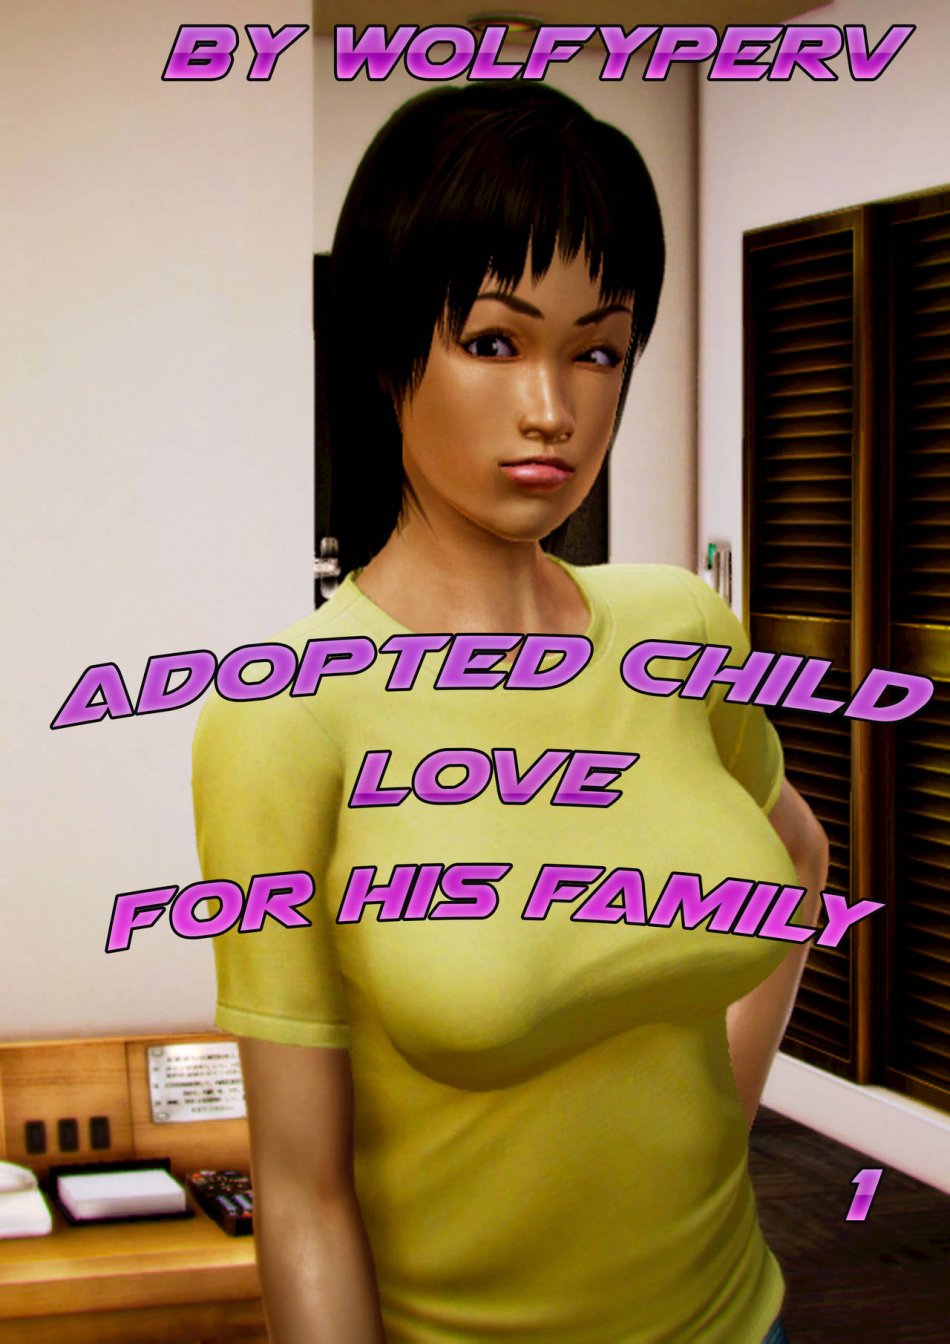 Adopted child's love for his family